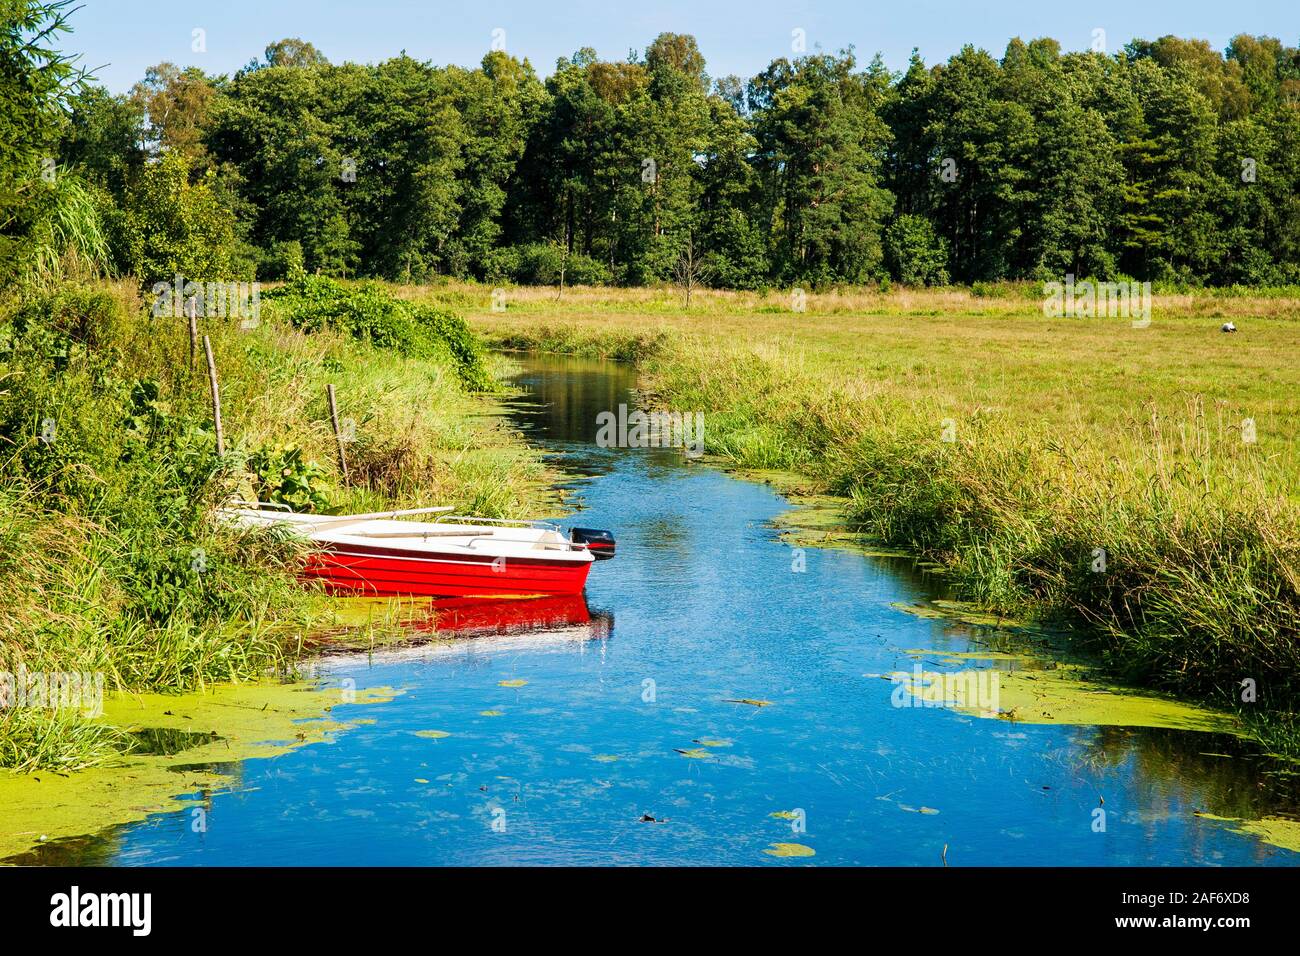 Summer landscape of polish cottage with boat on slow river. Stock Photo